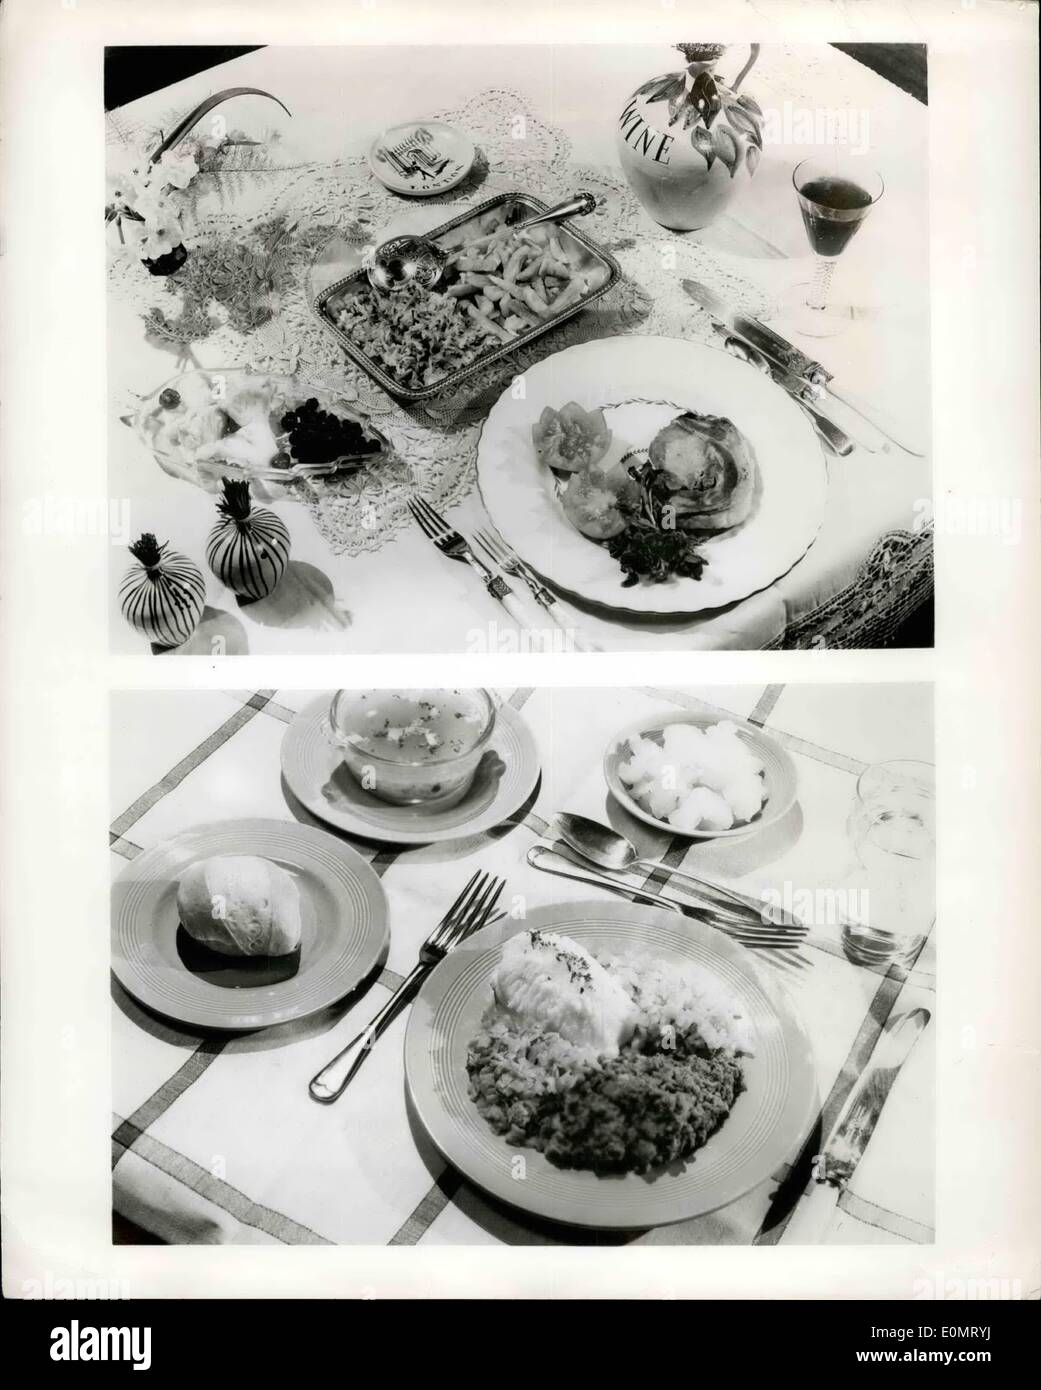 Aug. 08, 1956 - Meals in a match Box: British scientists have developed whole meals - one consists of soup, chopped beef, mashed potatoes, yellow turnips and apple dessert - that can be carried around in a match box in dried form and reconstituted by adding hot water. Alson on the menu are fish, pork chops, bananas, diced carrots, cabbage, pineapple, raspberries and whole tomatoes. The food, and extension of the process of dehydration used in World in world war II, is claimed to taste ''Just like the real thing.'' picture show Reconstituted pork chop, fried potatoes and white cabbage Stock Photo